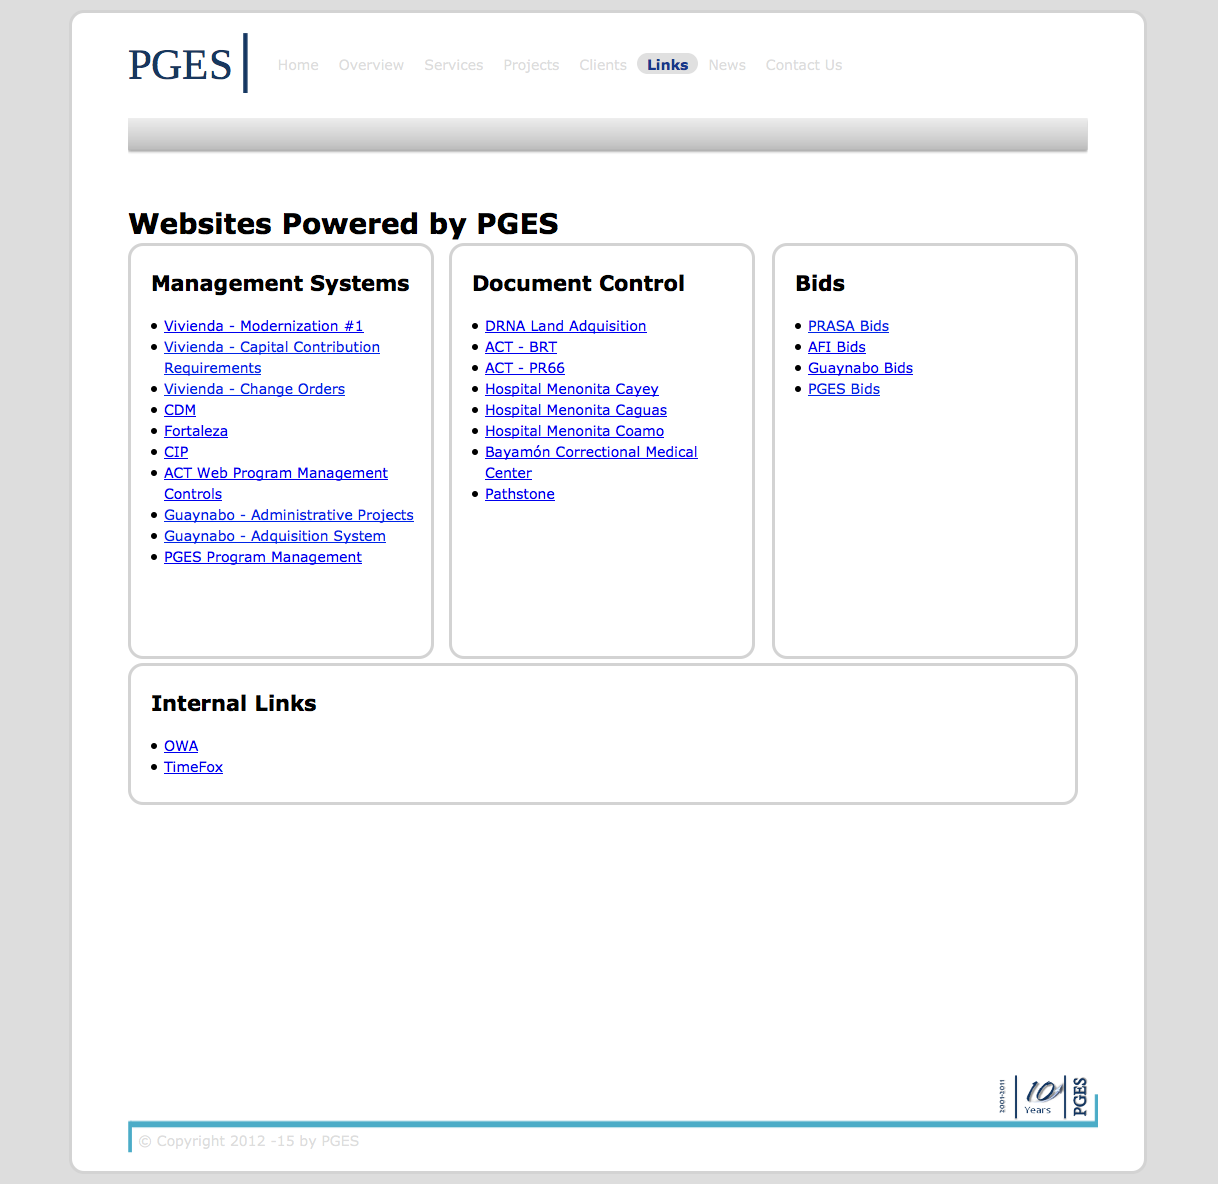 'PGES Online Systems'